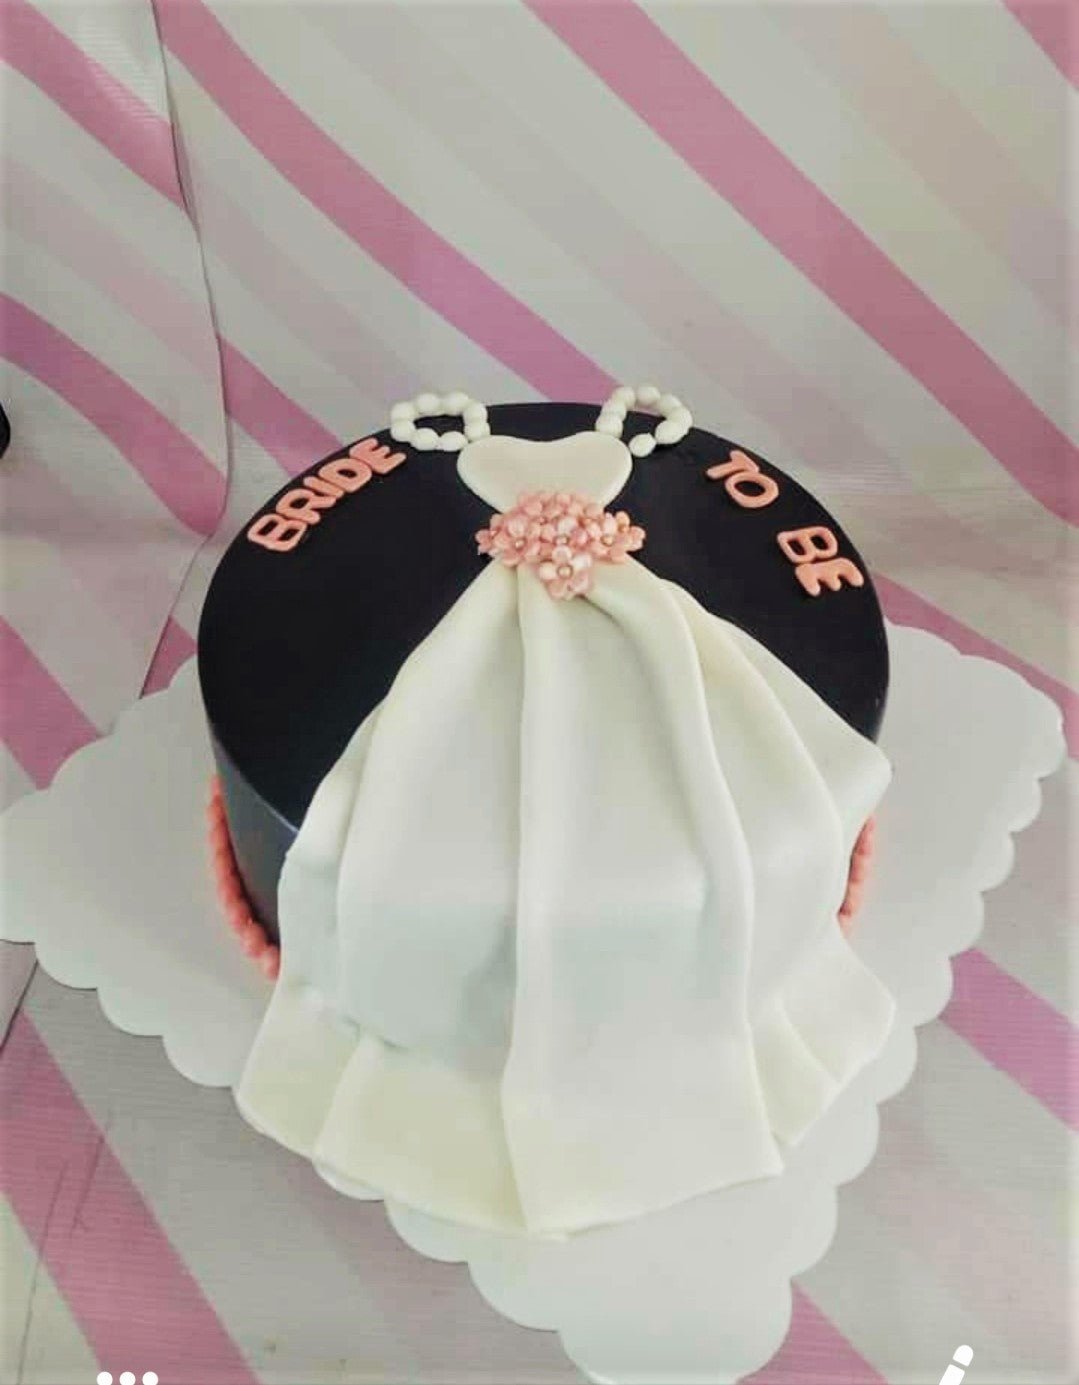 Bridal Shower Cake With Fondant Hearts. - CakeCentral.com